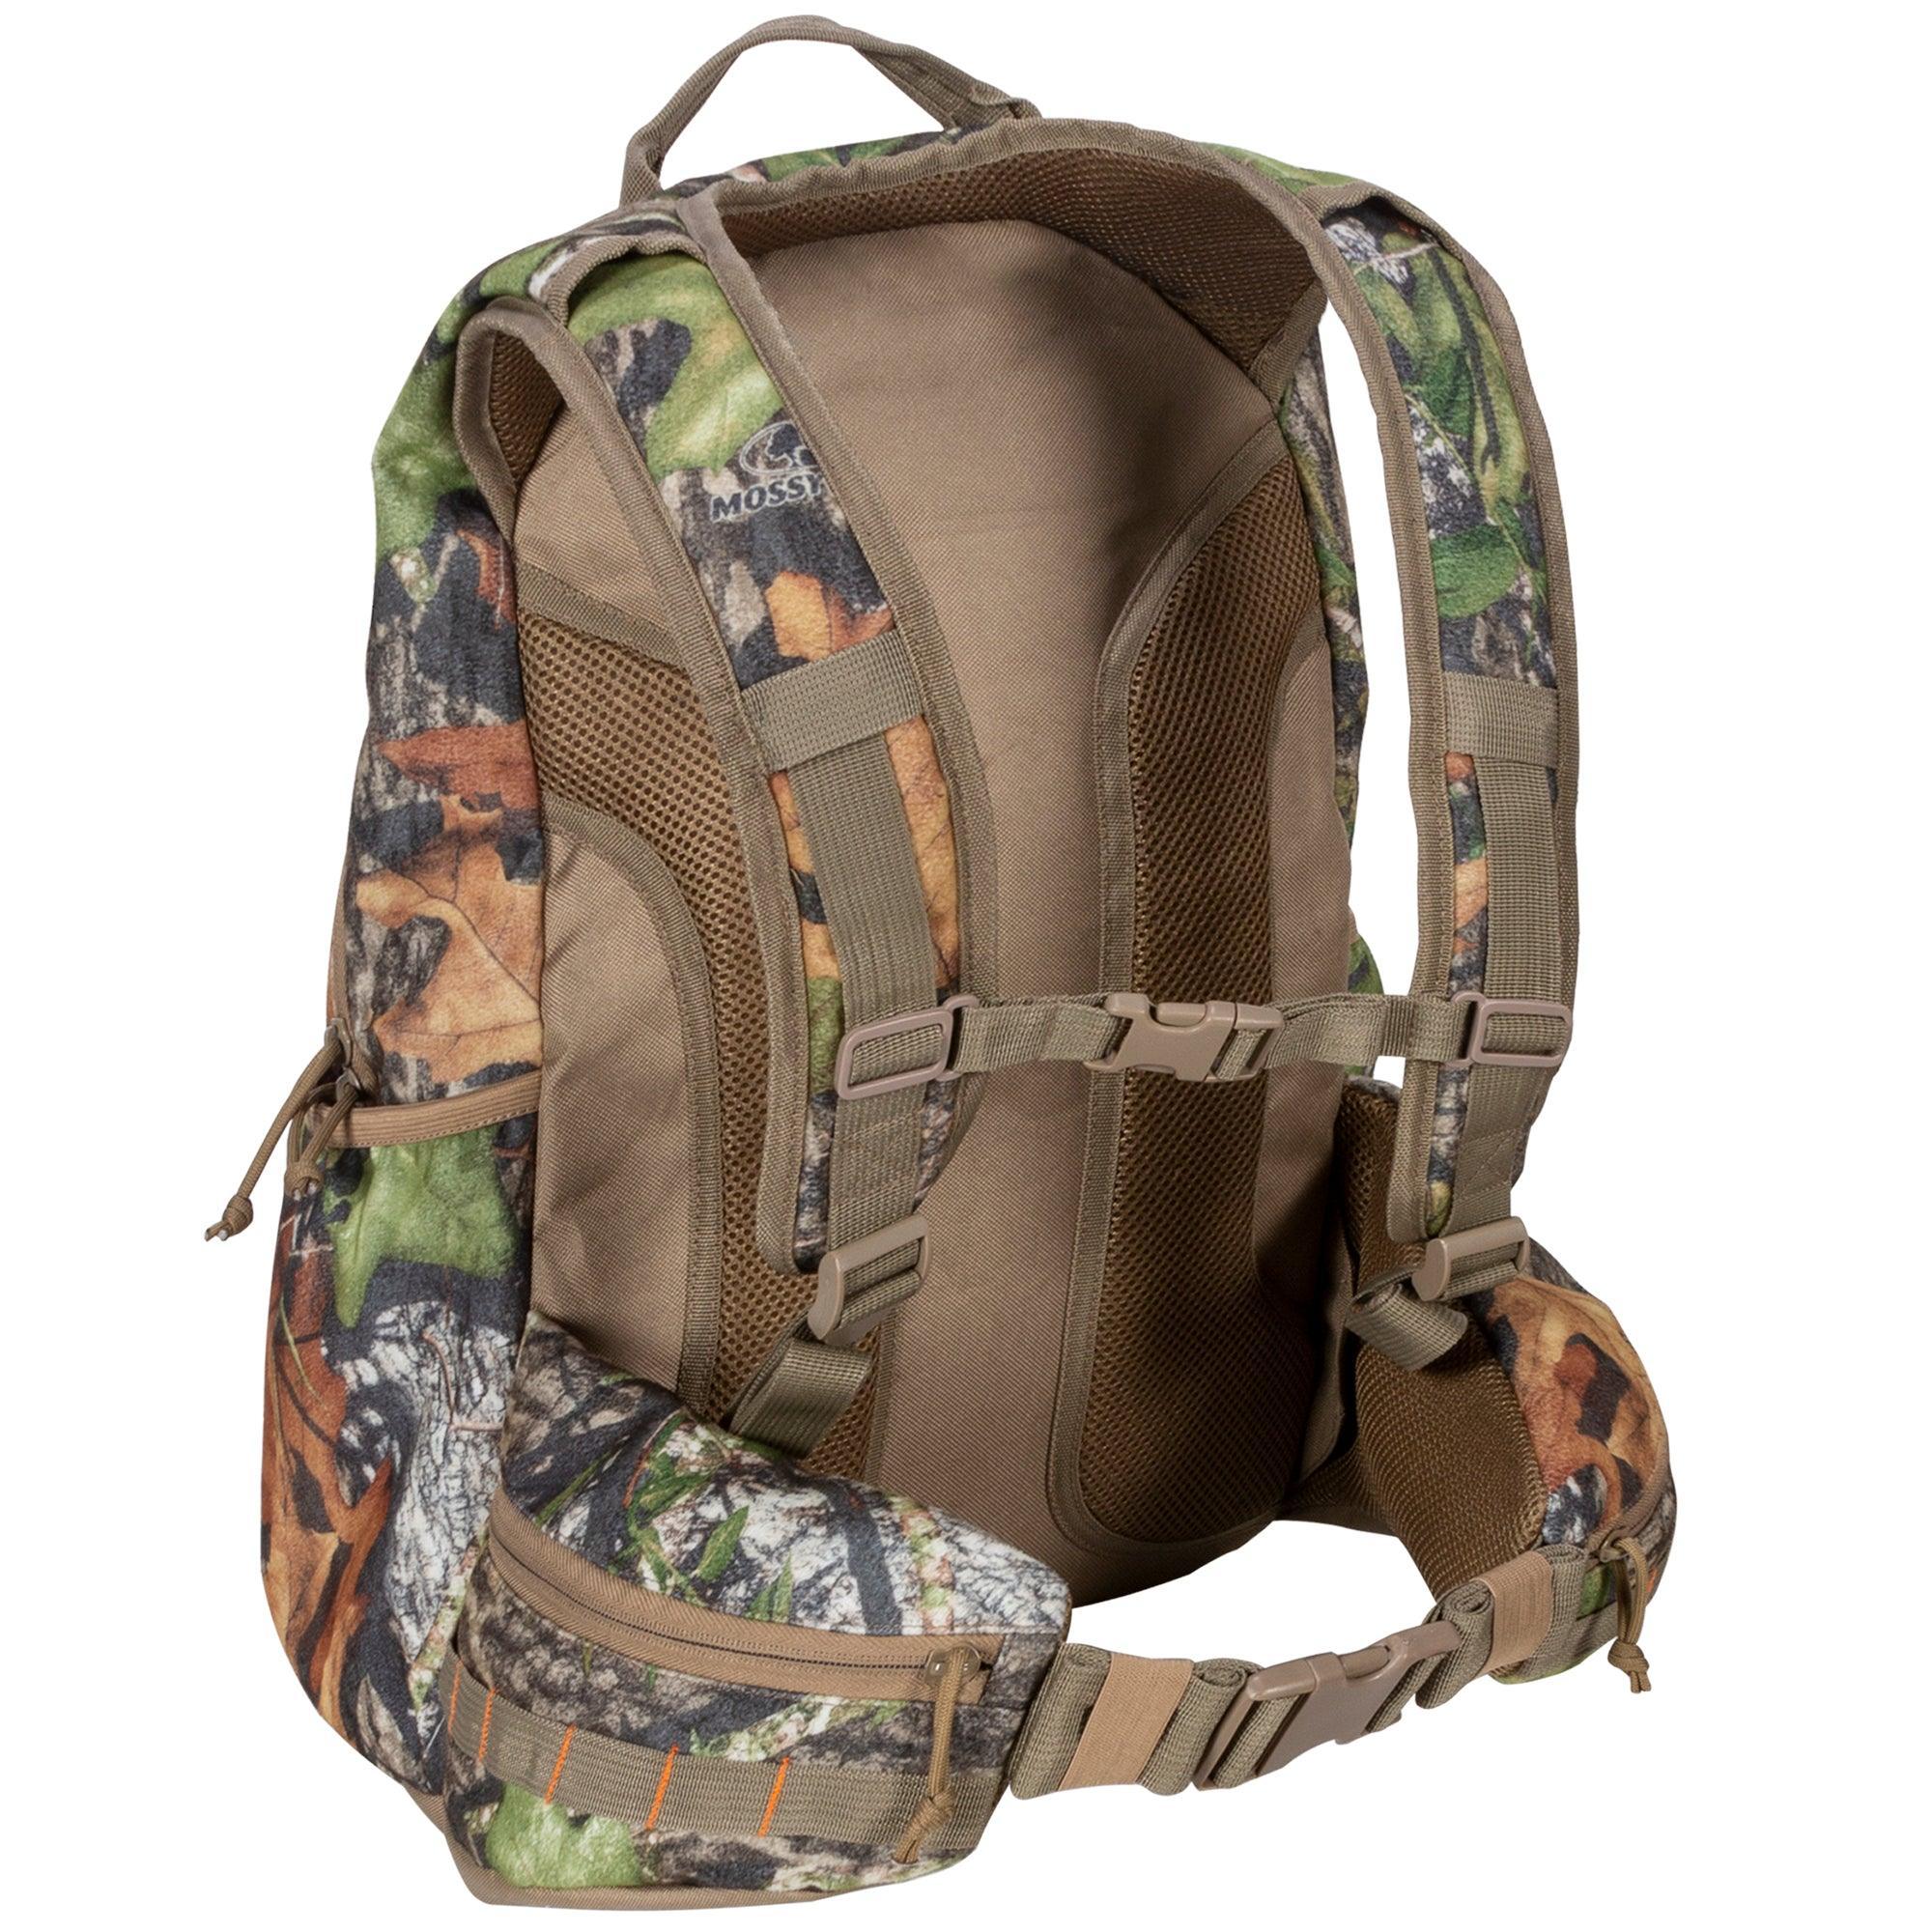 North Mountain Gear Mossy Oak Greenleaf 21L Backpack - Ultimate Hunting Pack